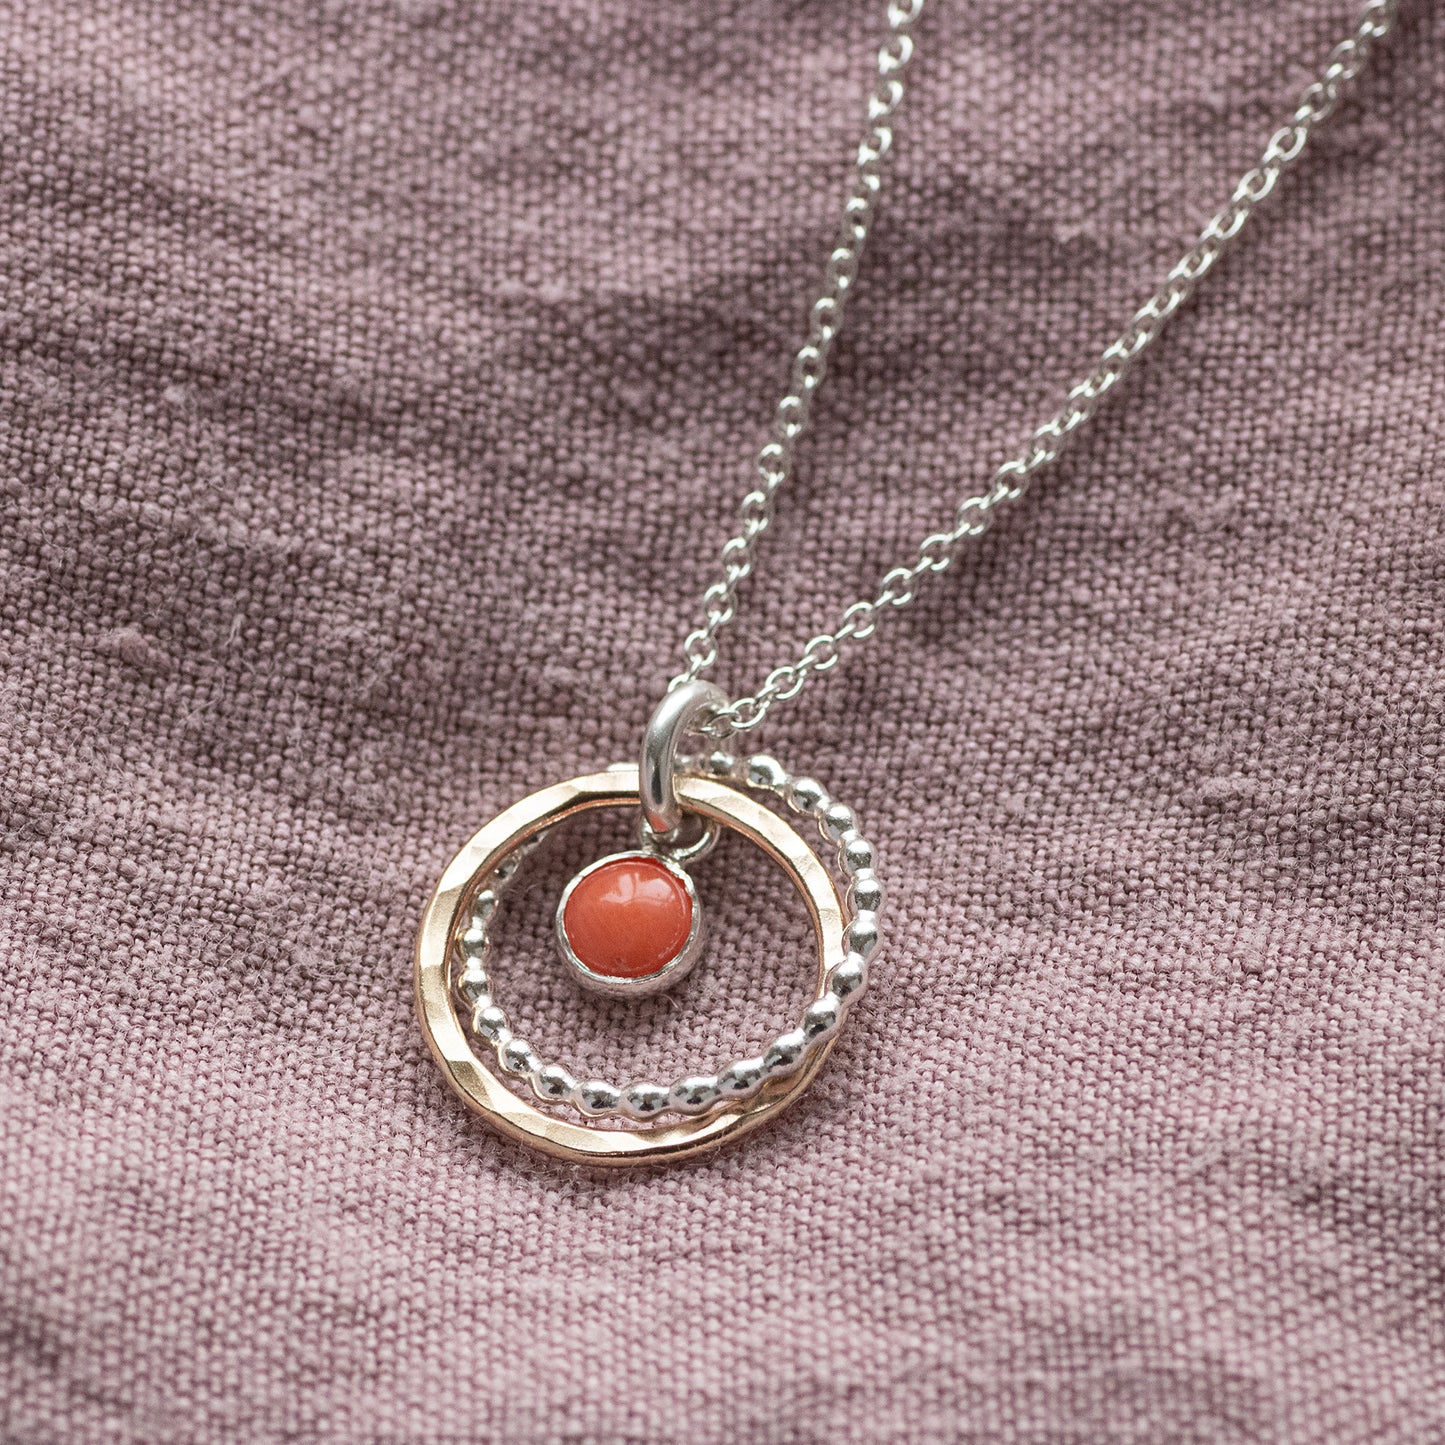 35th Anniversary Gift - Coral Anniversary Necklace - Silver & Gold